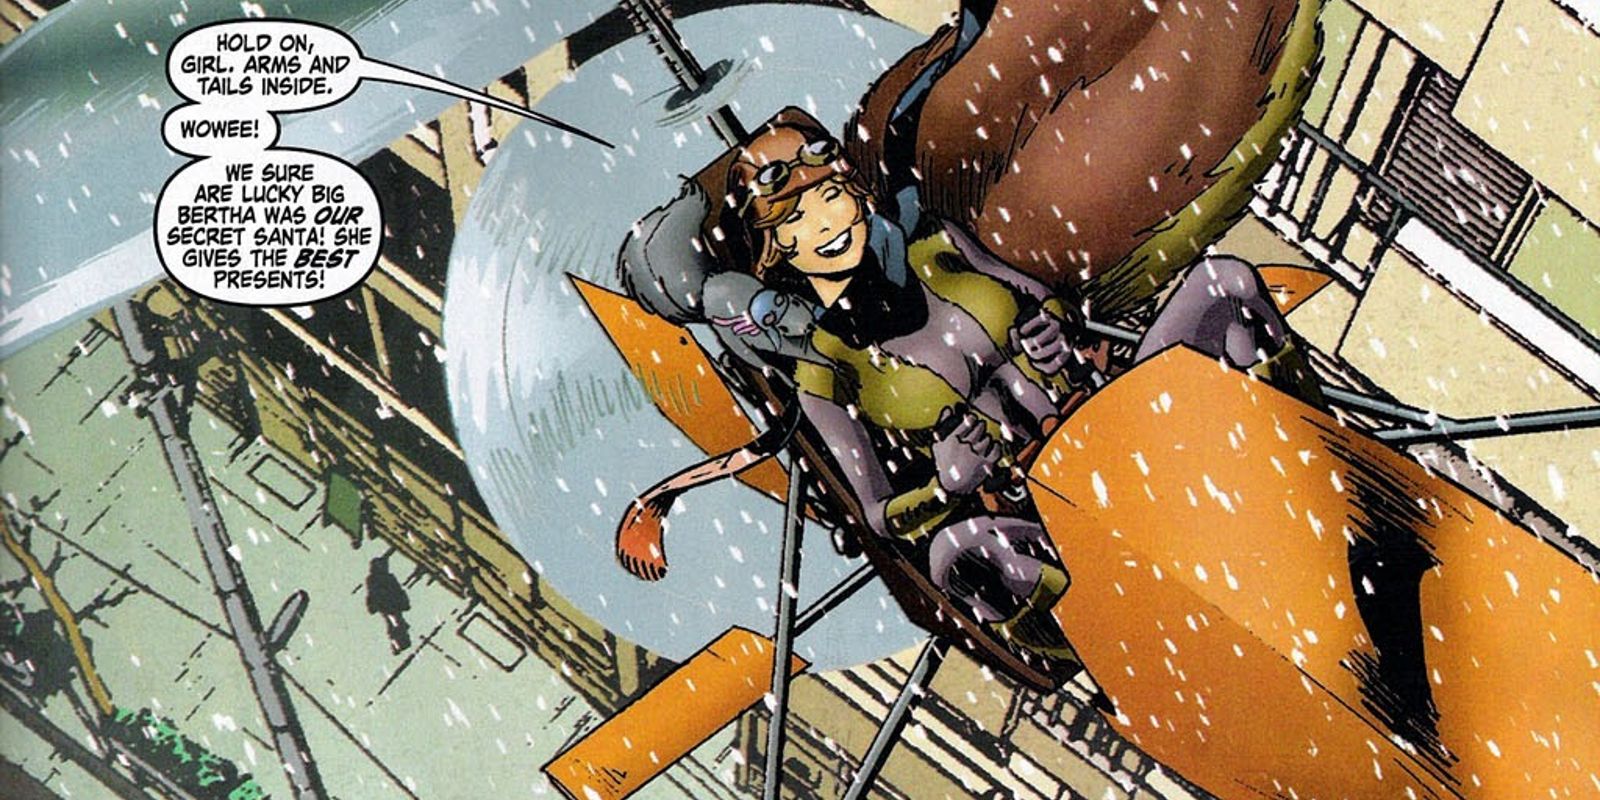 Squirrel Girl flying away in her gyrocopter in GLX Mas Special